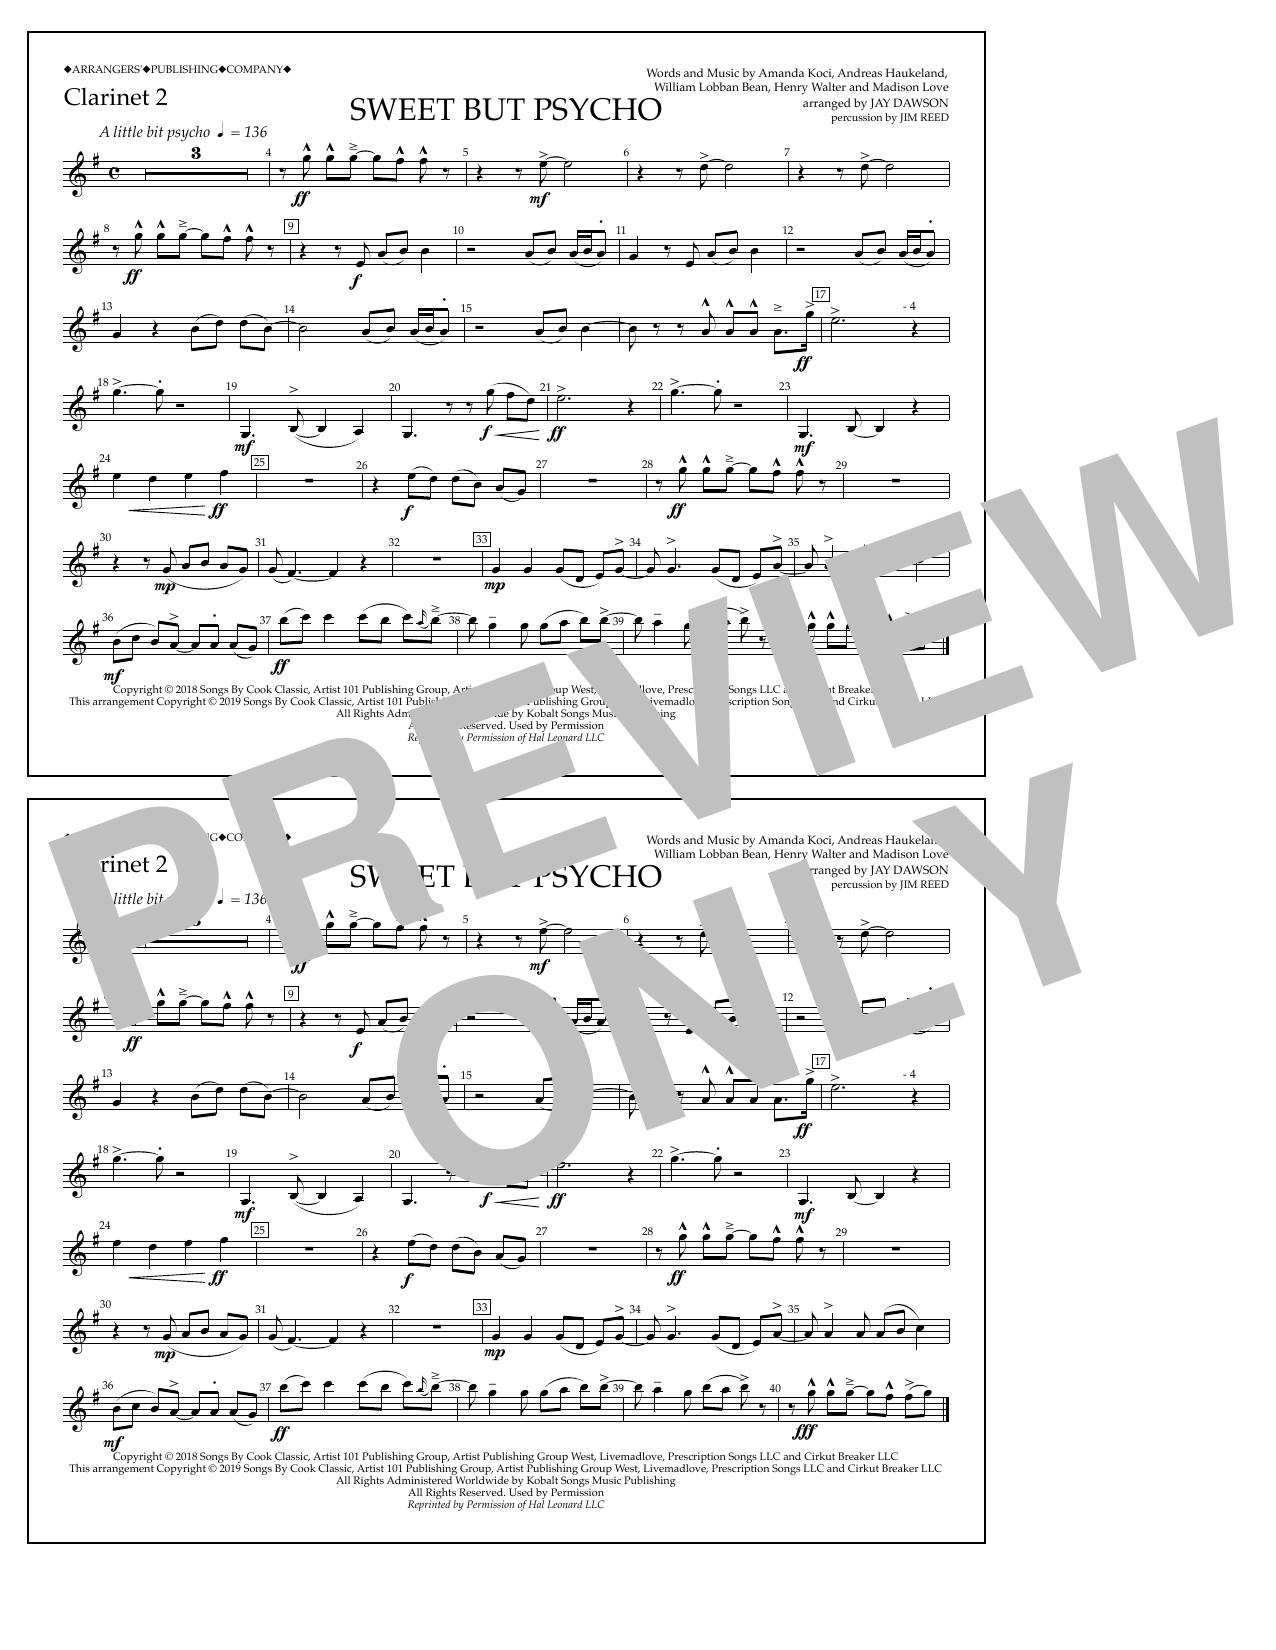 Download Ava Max Sweet But Psycho (arr. Jay Dawson) - Cl Sheet Music